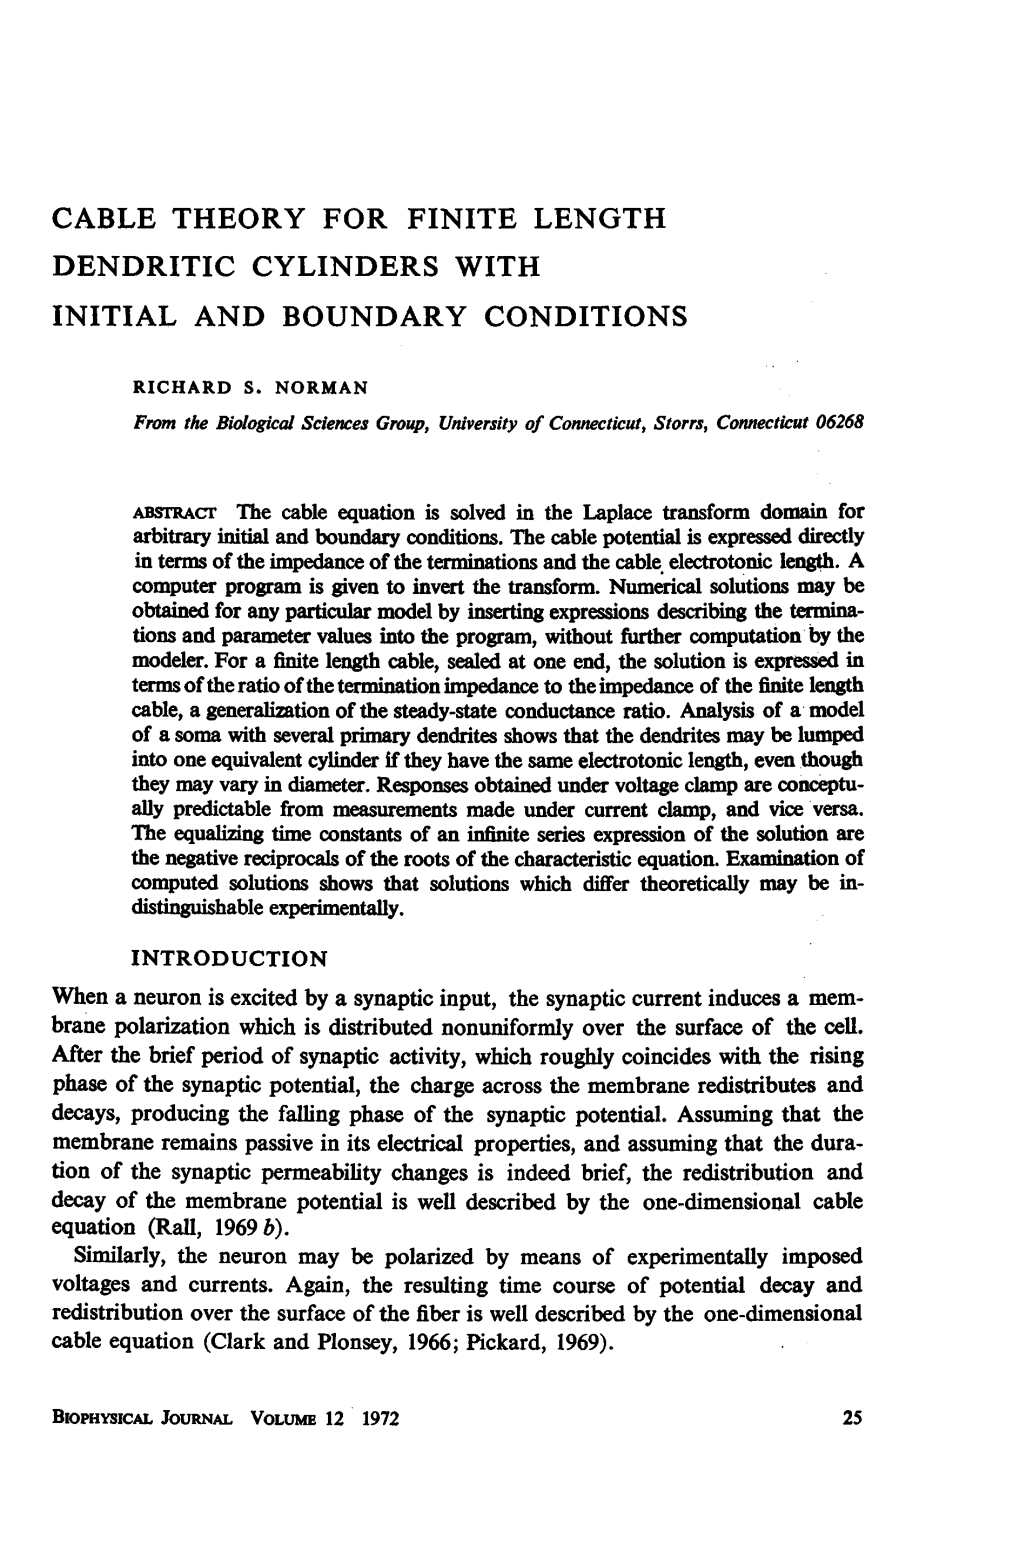 Cable Theory for Finite Length Dendritic Cylinders with Initial and Boundary Conditions